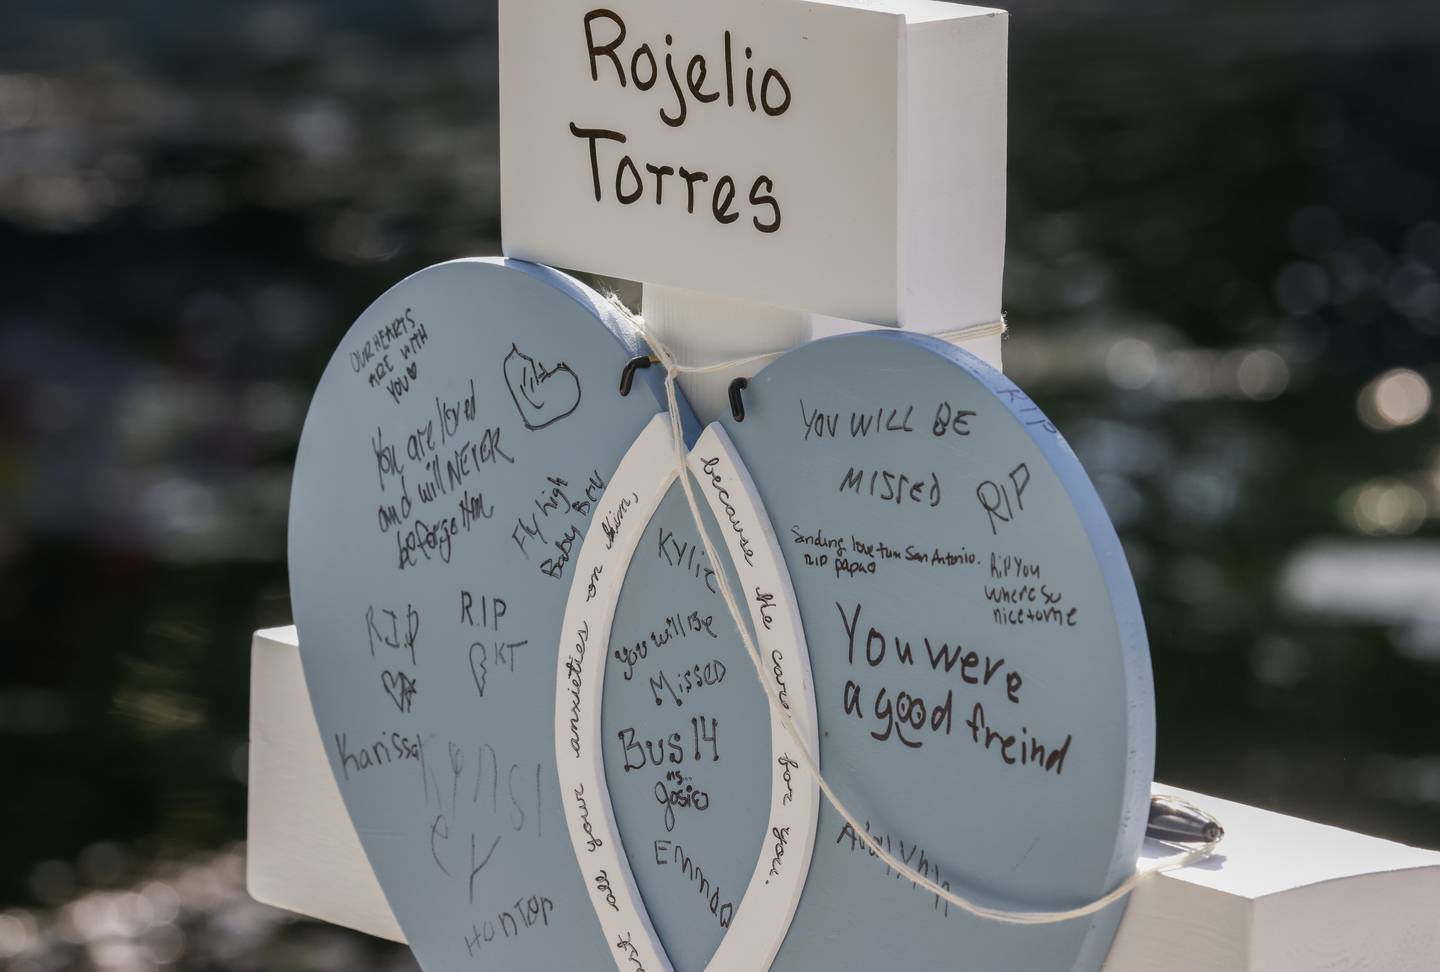 People leave flowers and sign messages on crosses bearing the names of victims in the city park following the mass shooting at the Robb Elementary School in Uvalde, 26 May. EPA